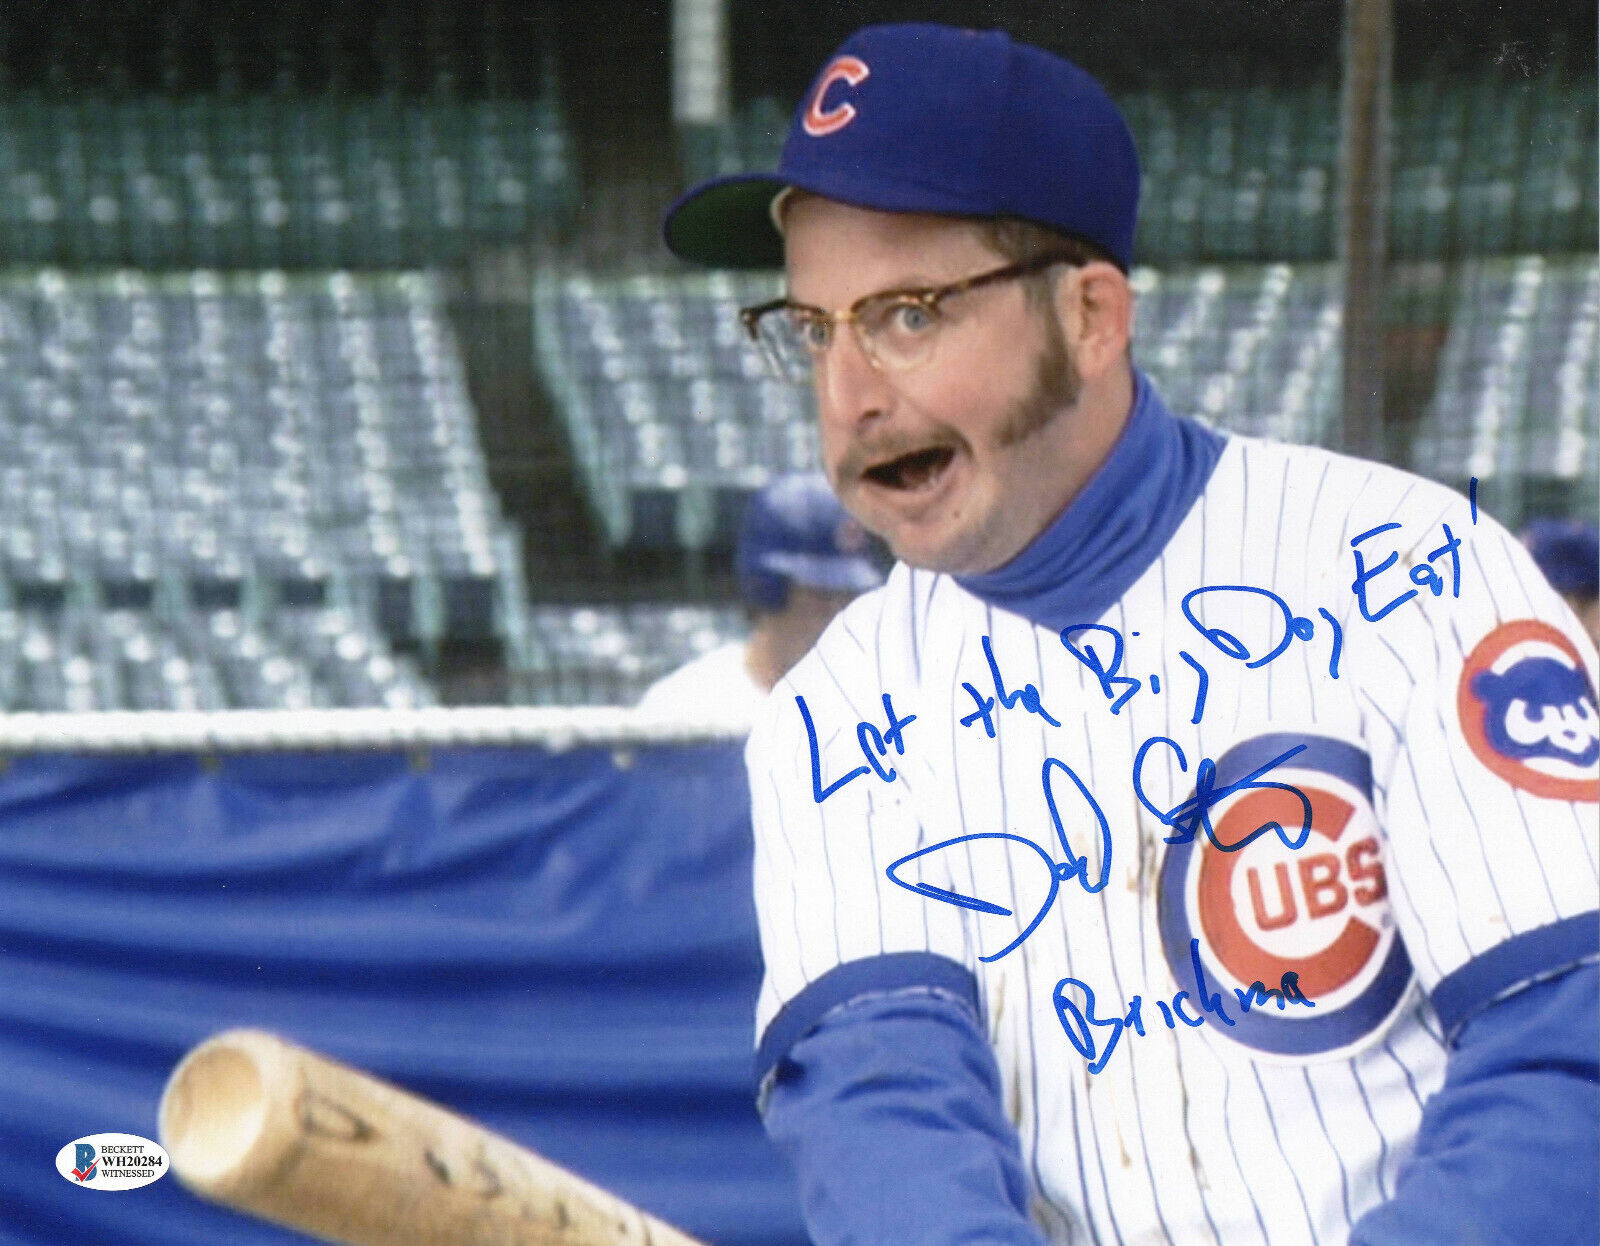 DANIEL STERN SIGNED AUTOGRAPH 'ROOKIE OF THE YEAR' 11X14 PHOTO BECKETT BAS 56